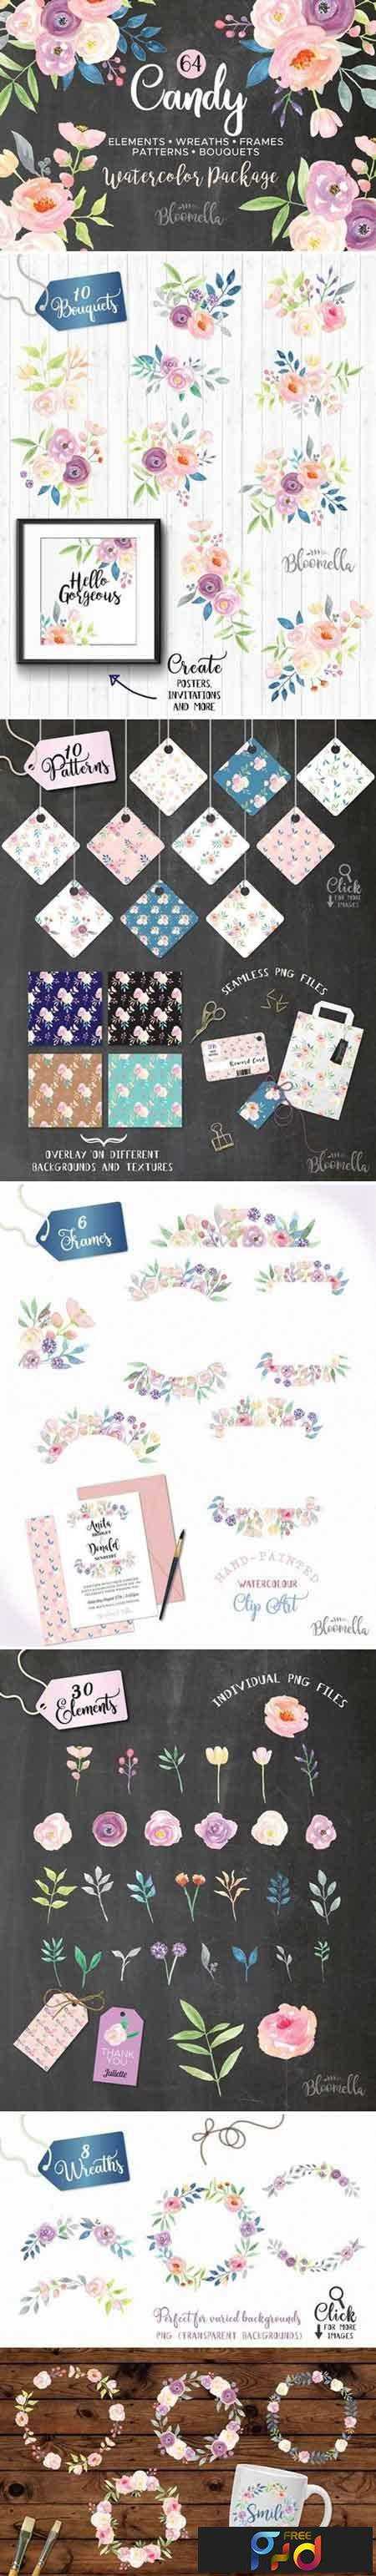 FreePsdVn.com 1803209 STOCK candy pastel watercolor flower pack 2227773